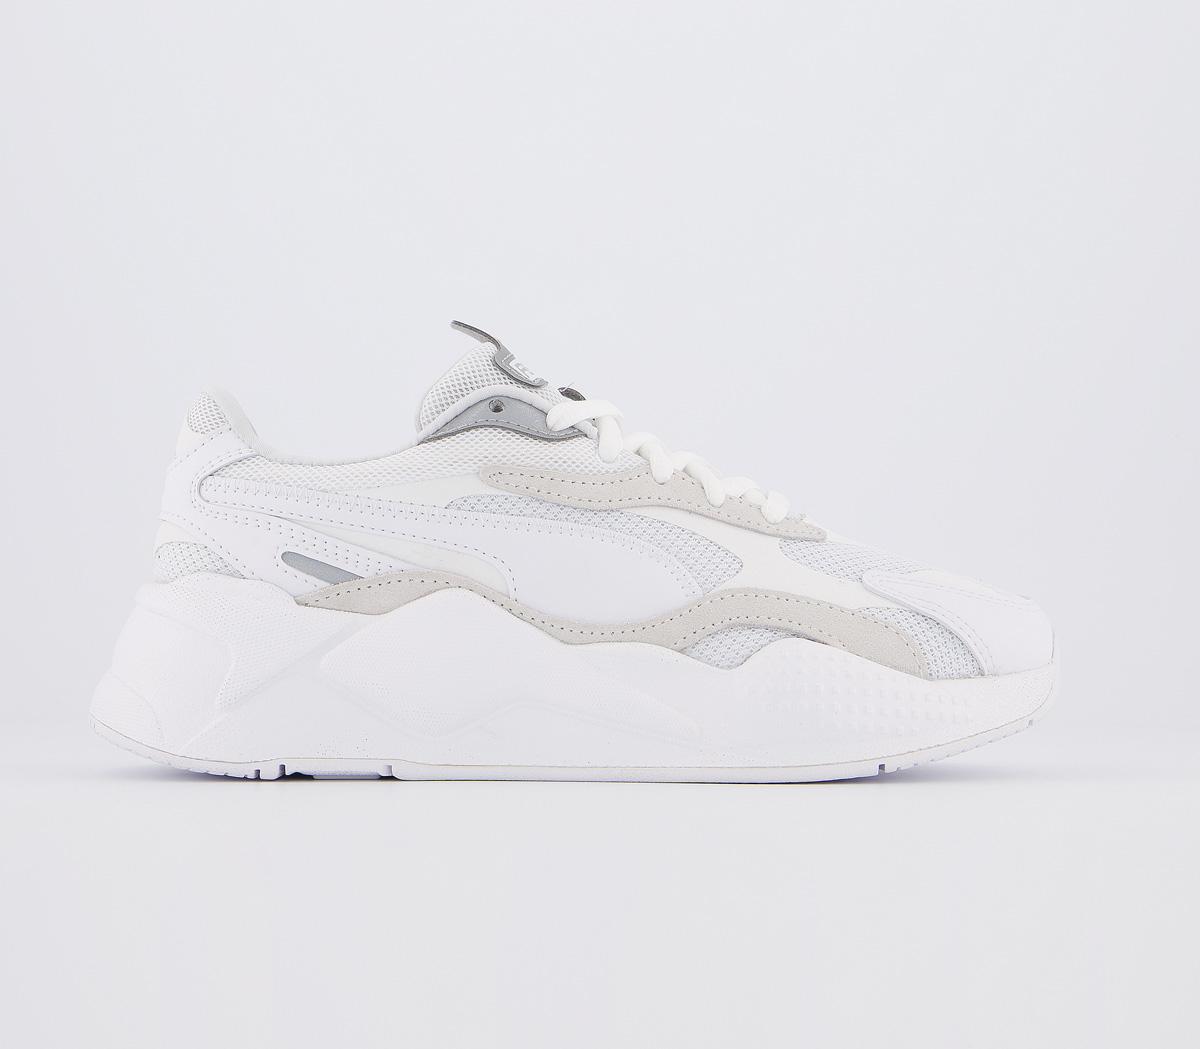 Norm bevroren Londen Puma Rs-x³ Puzzle Trainers White Silver - Unisex Sports